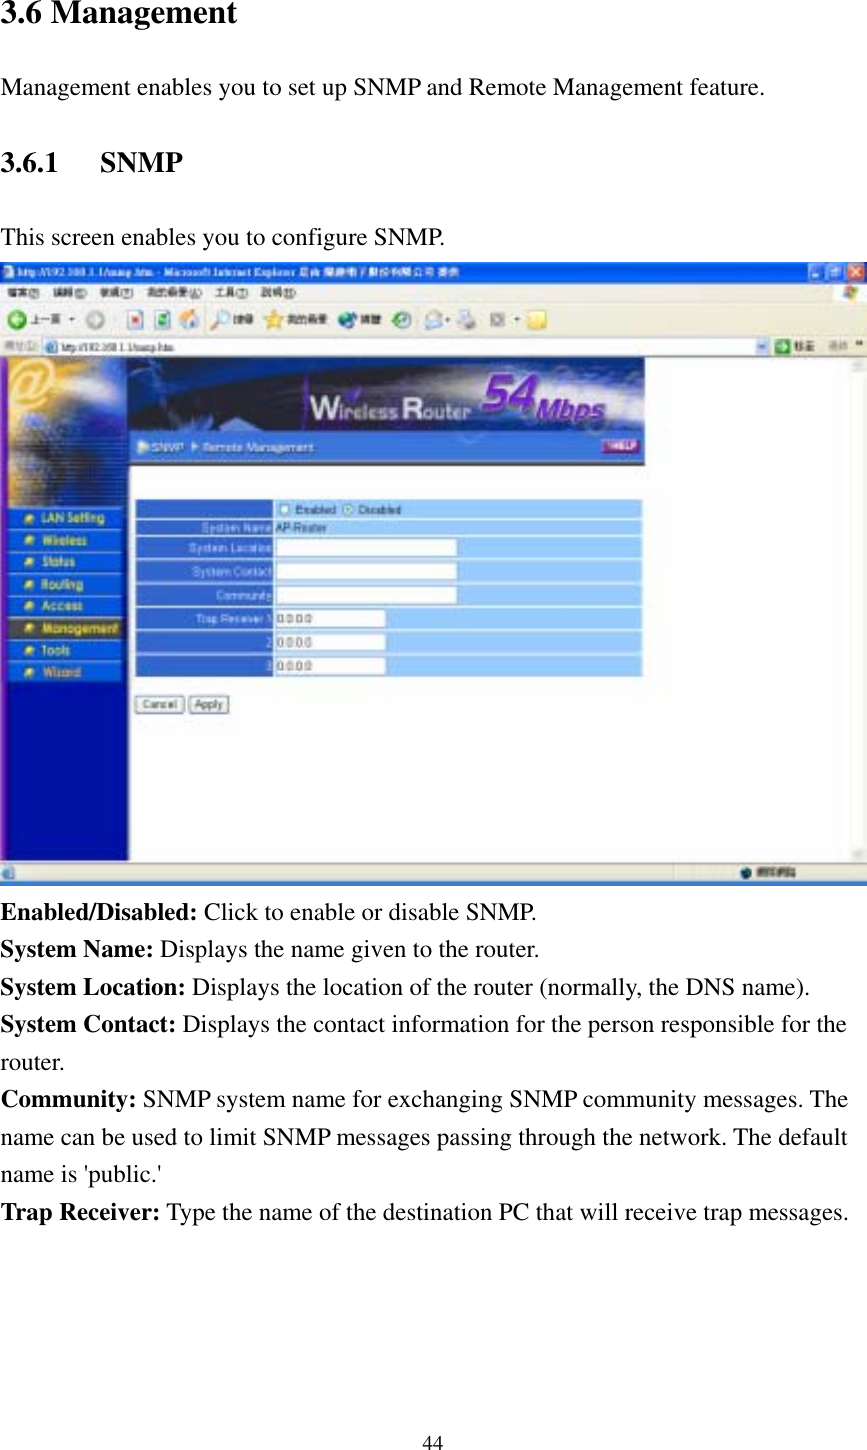  443.6 Management Management enables you to set up SNMP and Remote Management feature. 3.6.1 SNMP This screen enables you to configure SNMP.  Enabled/Disabled: Click to enable or disable SNMP. System Name: Displays the name given to the router. System Location: Displays the location of the router (normally, the DNS name). System Contact: Displays the contact information for the person responsible for the router. Community: SNMP system name for exchanging SNMP community messages. The name can be used to limit SNMP messages passing through the network. The default name is &apos;public.&apos; Trap Receiver: Type the name of the destination PC that will receive trap messages.  